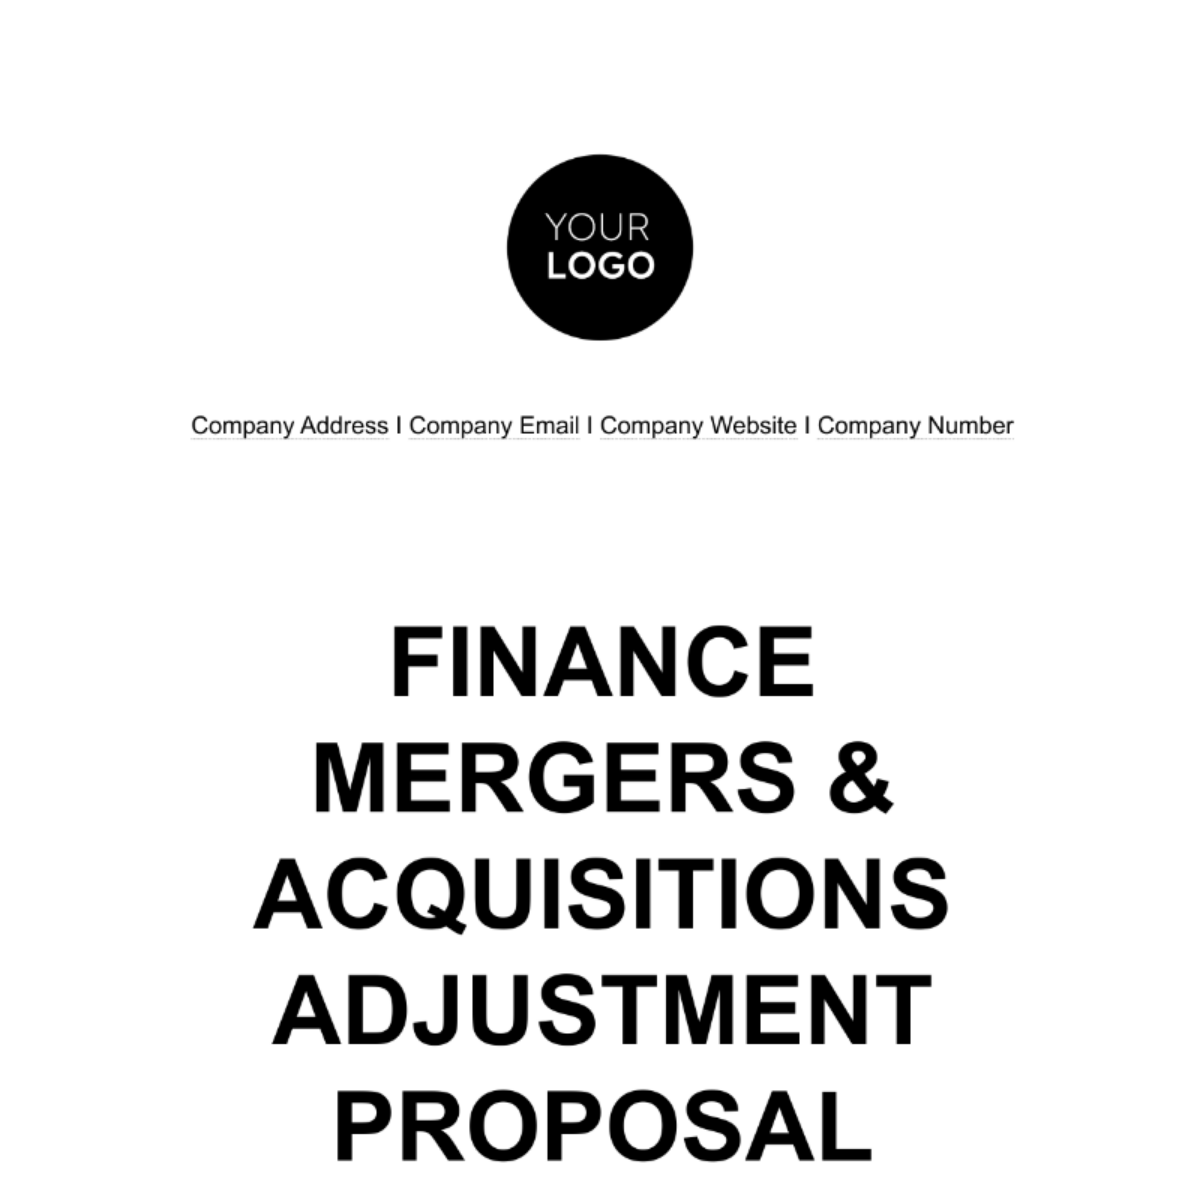 Finance Mergers & Acquisitions Adjustment Proposal Template